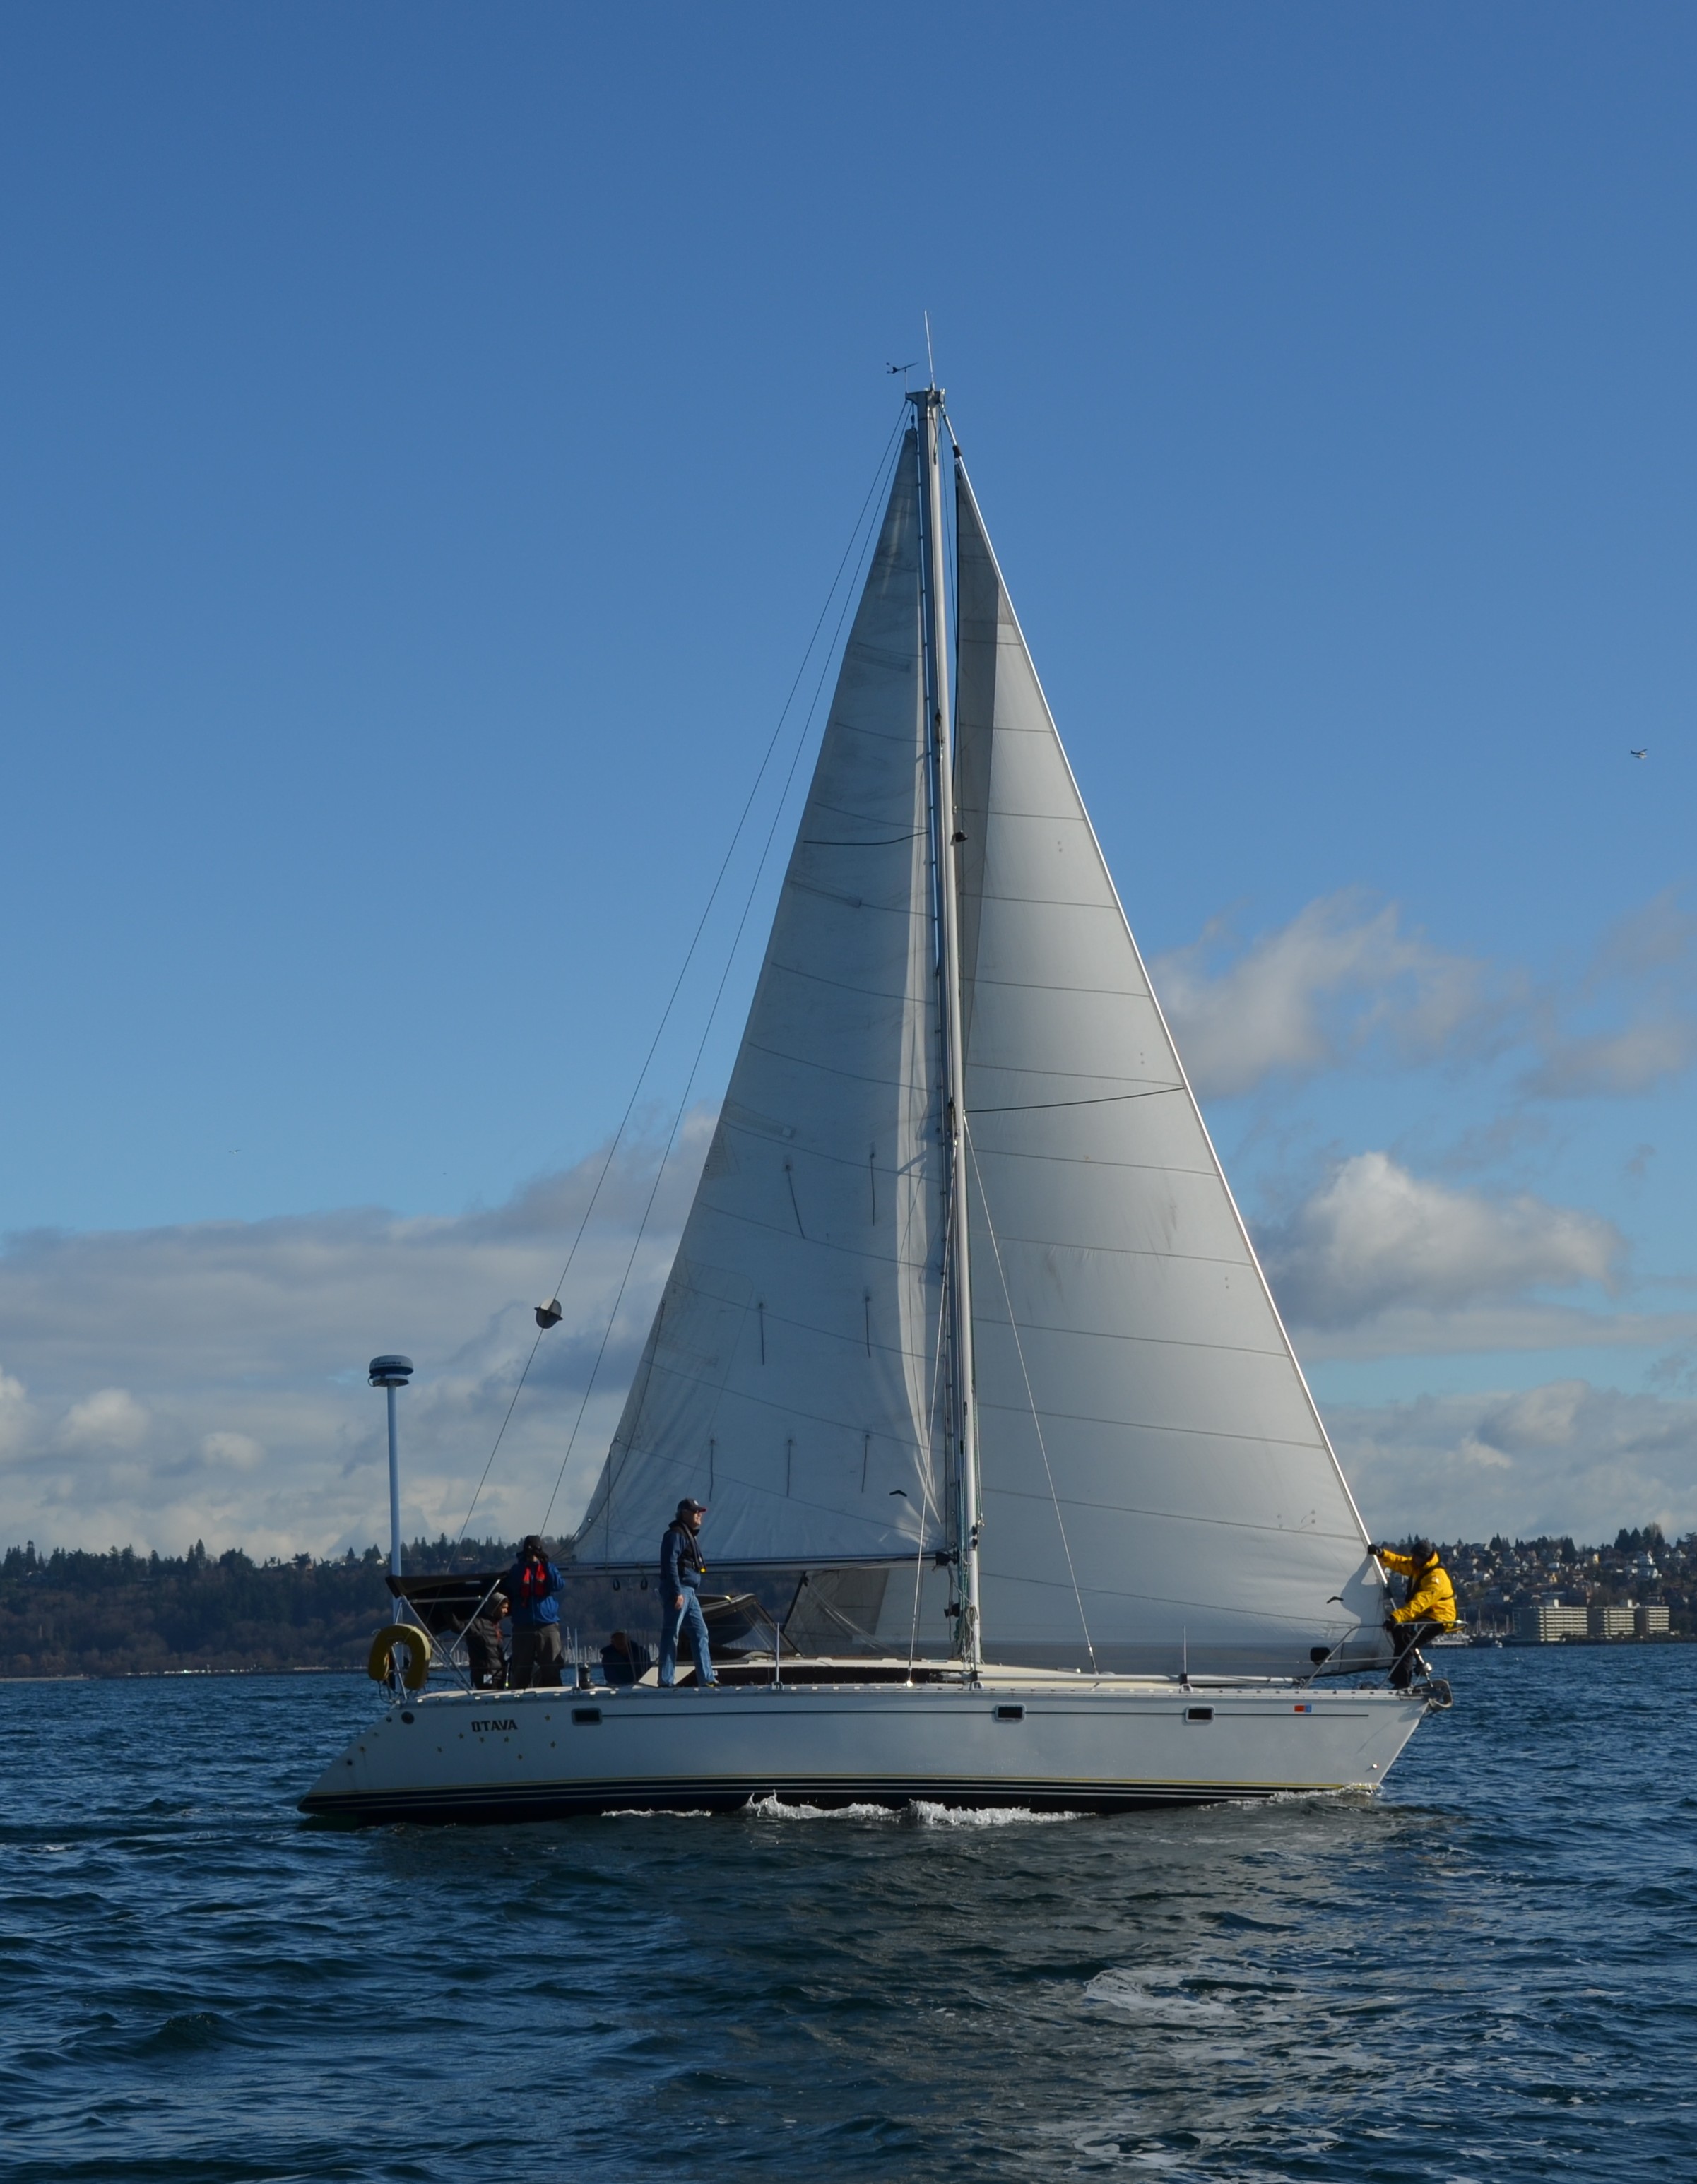 sailboats for rent near me